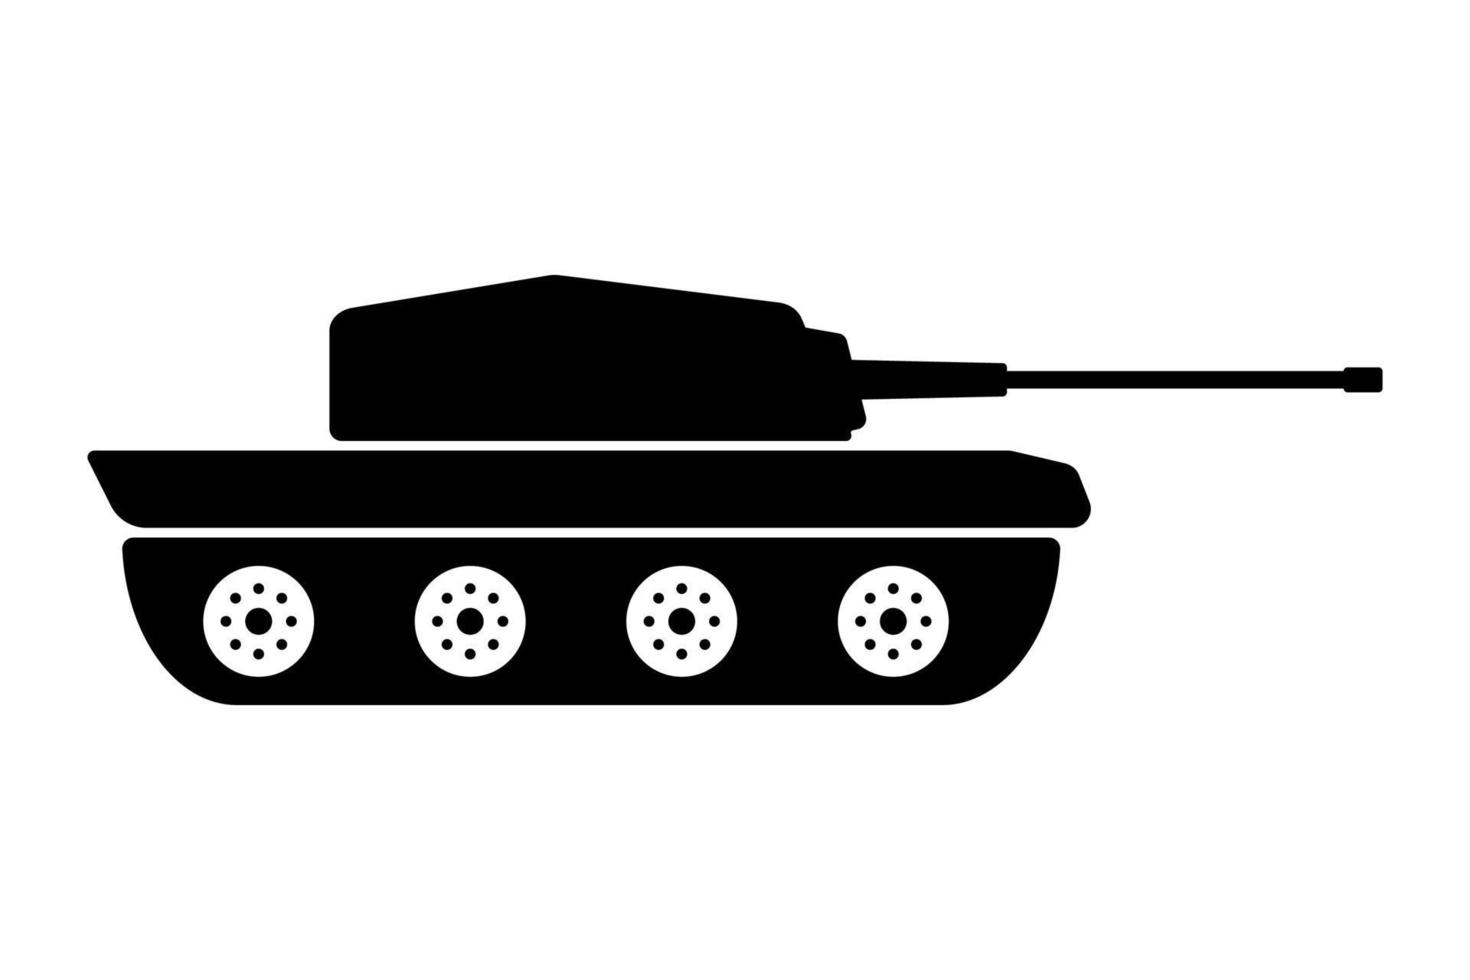 https://static.vecteezy.com/system/resources/previews/007/266/170/non_2x/military-tank-silhouette-icon-panzer-vehicle-force-pictogram-tank-army-black-symbol-armed-machine-weapon-icon-army-transportation-logo-defense-war-ammunition-isolated-illustration-vector.jpg